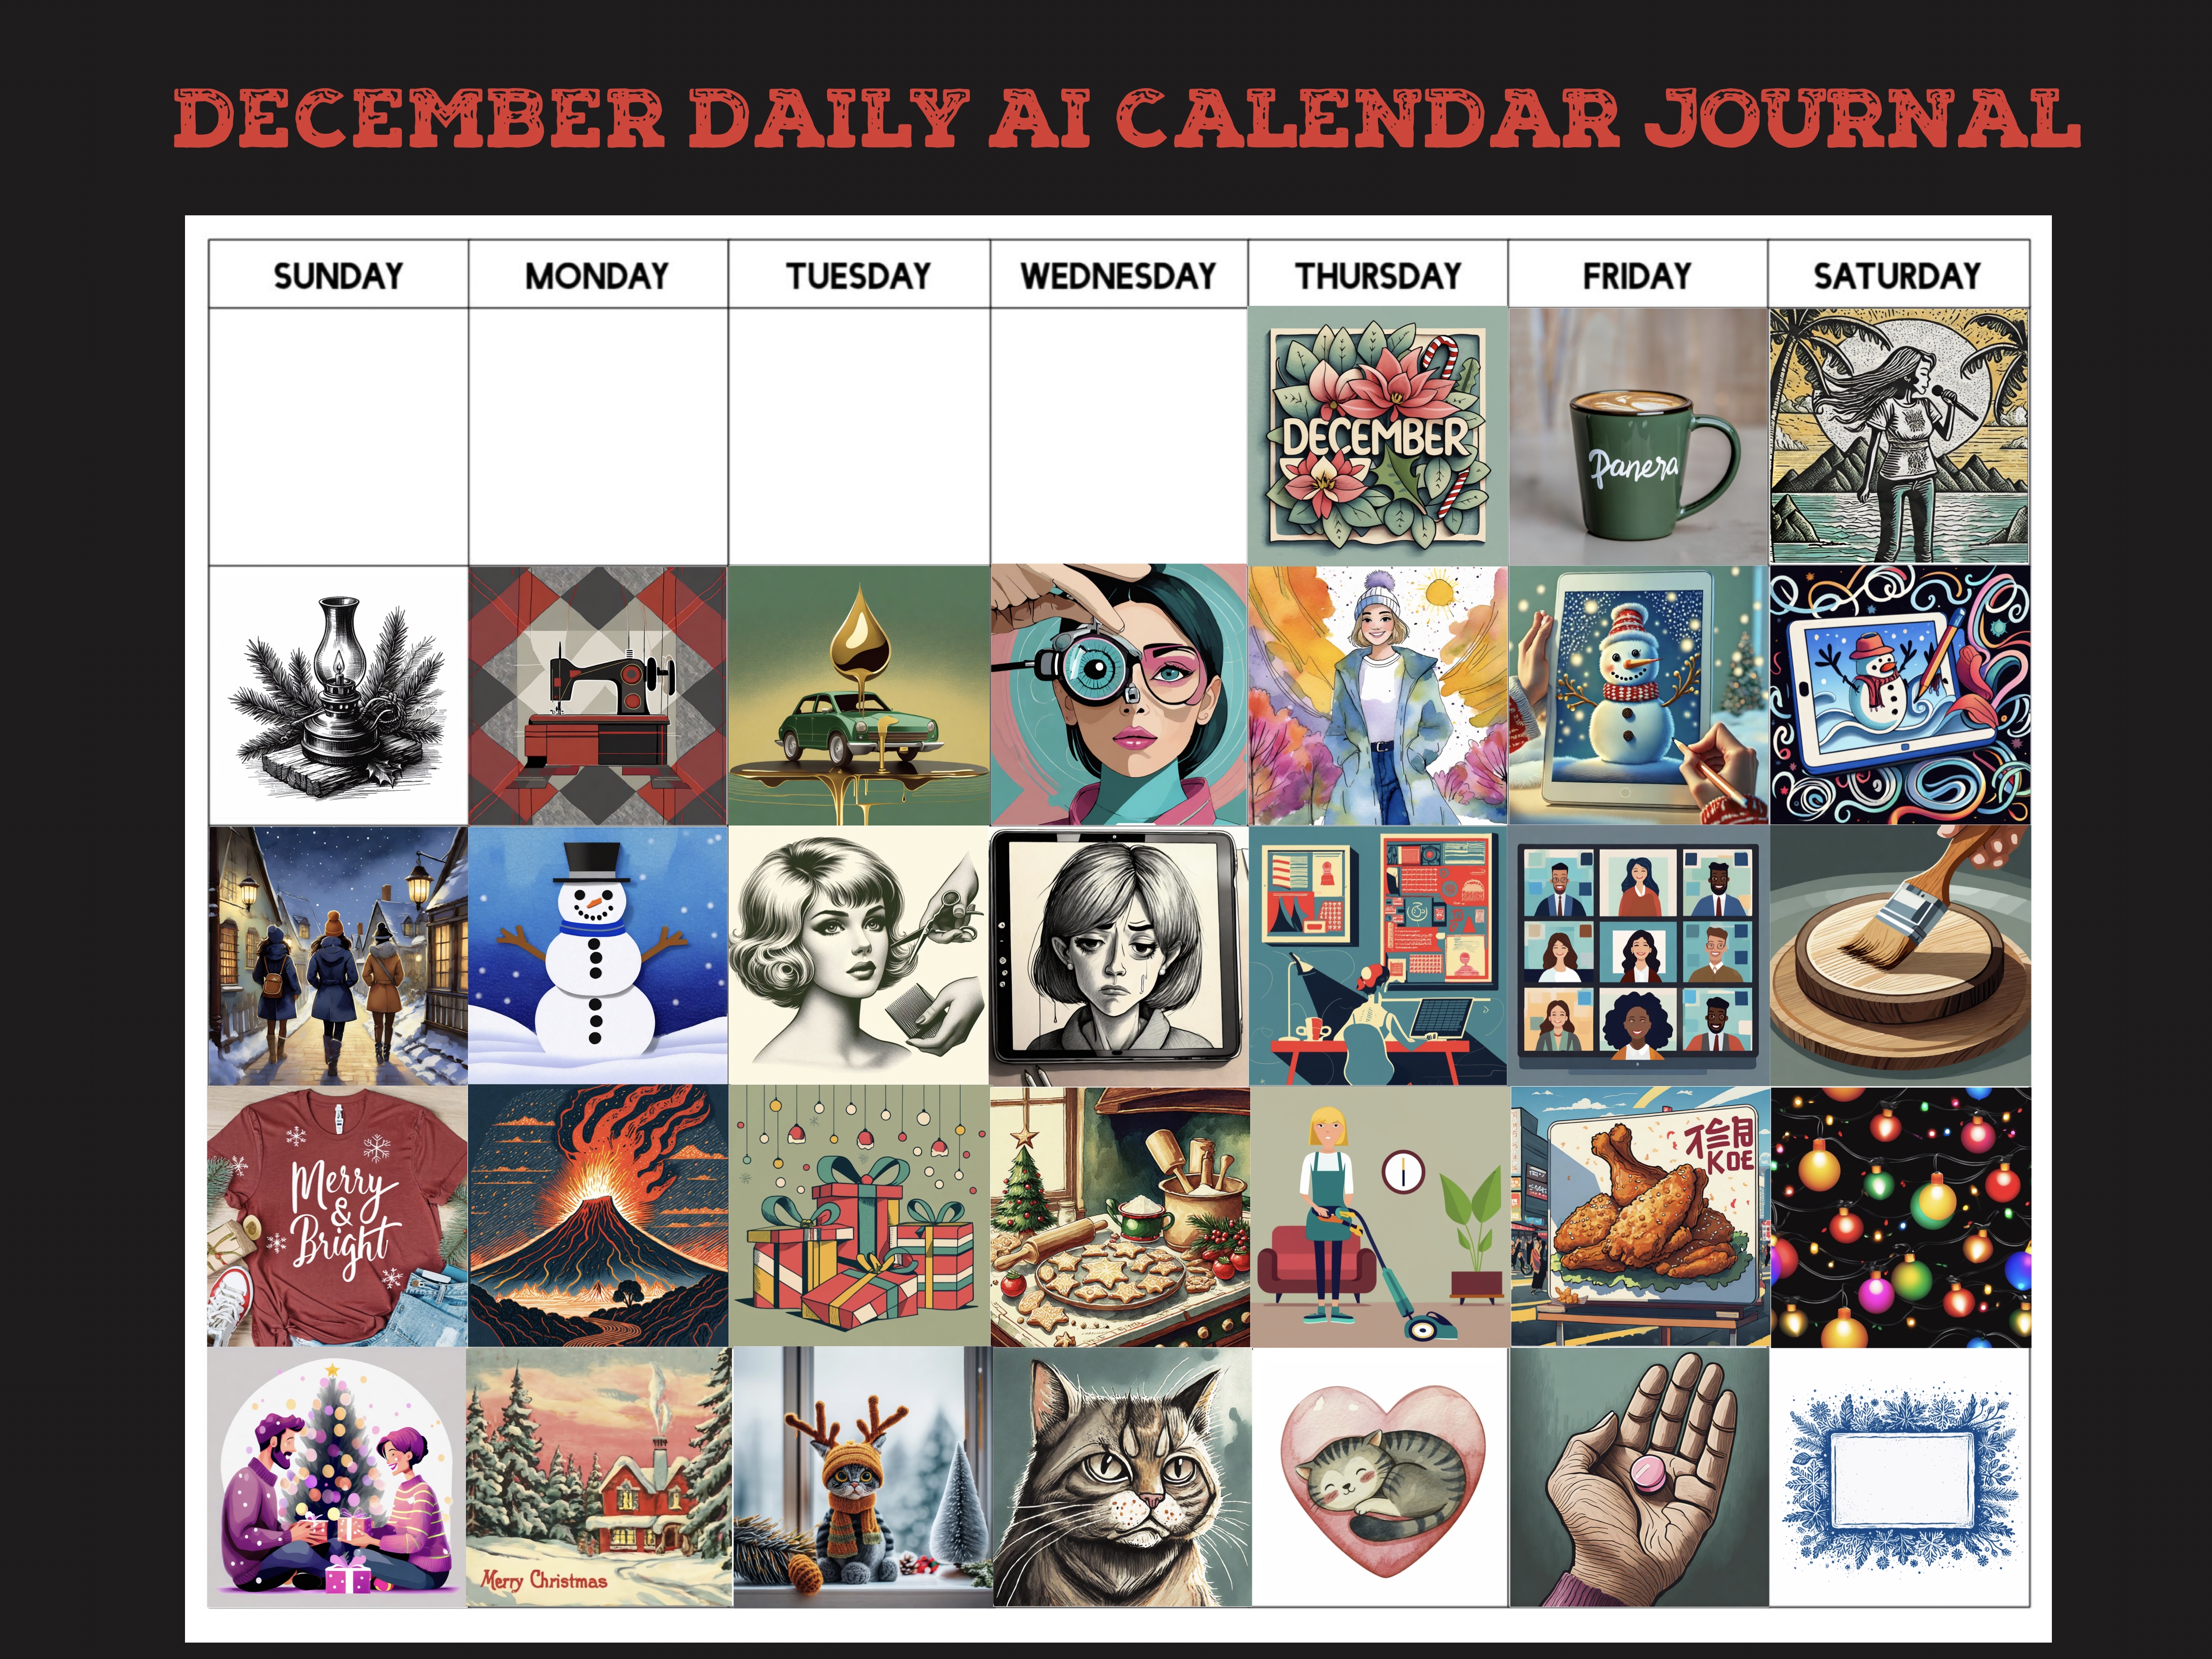 December calendar with spaces filled with daily AI images